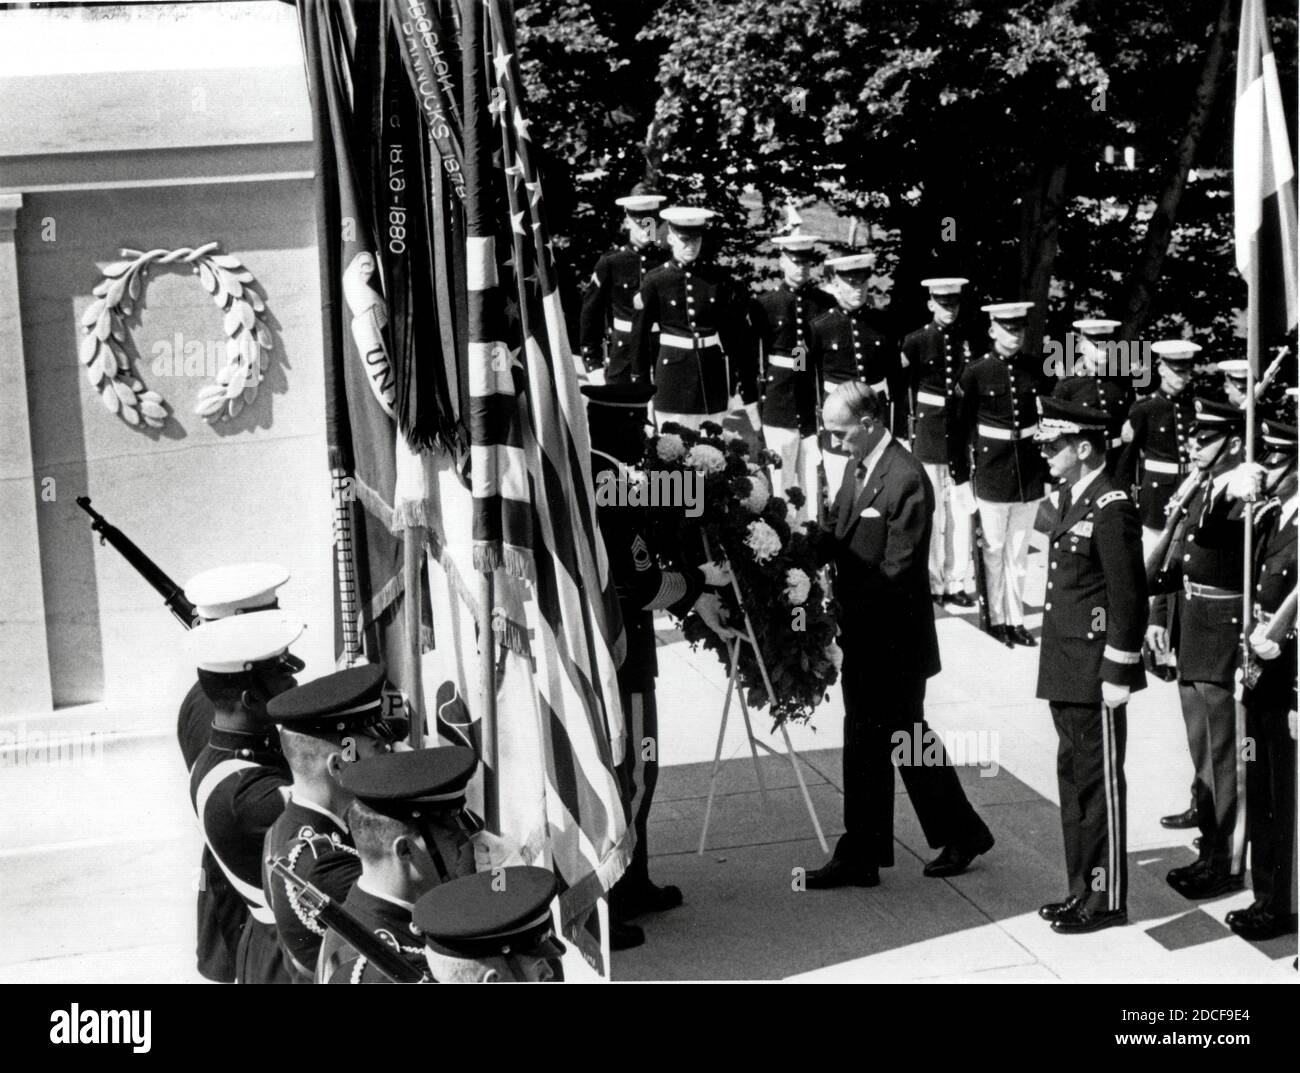 President Valéry Giscard d'Estaing of France, lays a wreath at the Tomb of the Unknown Soldier at Arlington National Cemetery in Arlington, Virginia on May 17, 1976.  Credit: Benjamin E. 'Gene' Forte / CNP /MediaPunch Stock Photo